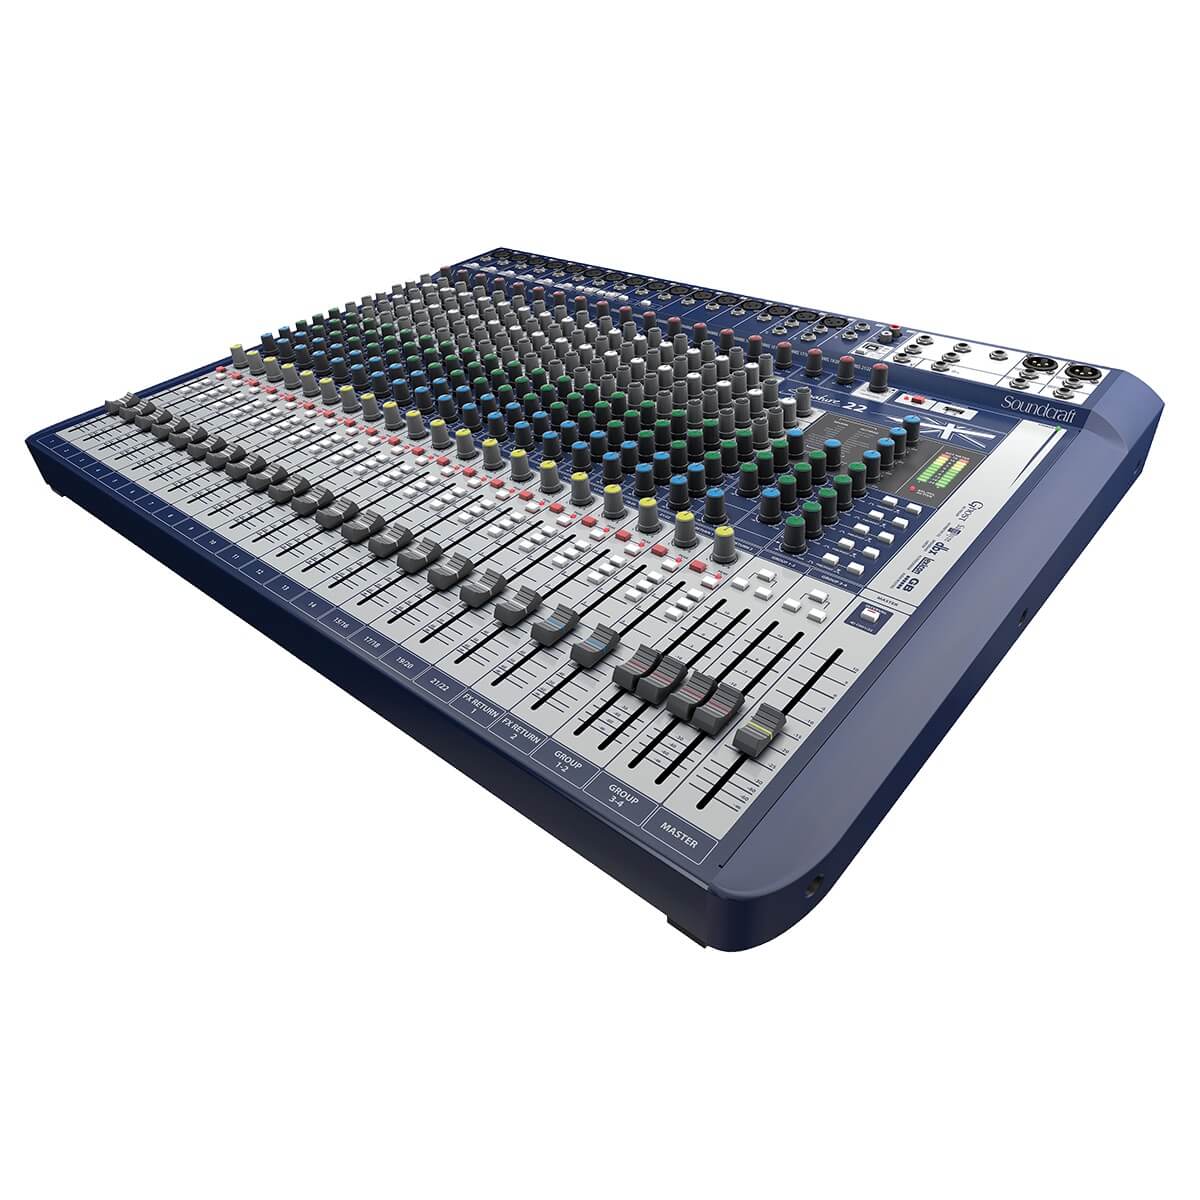 Soundcraft Signature 22 - 22-channel Analog Mixer with Lexicon Effects, angle